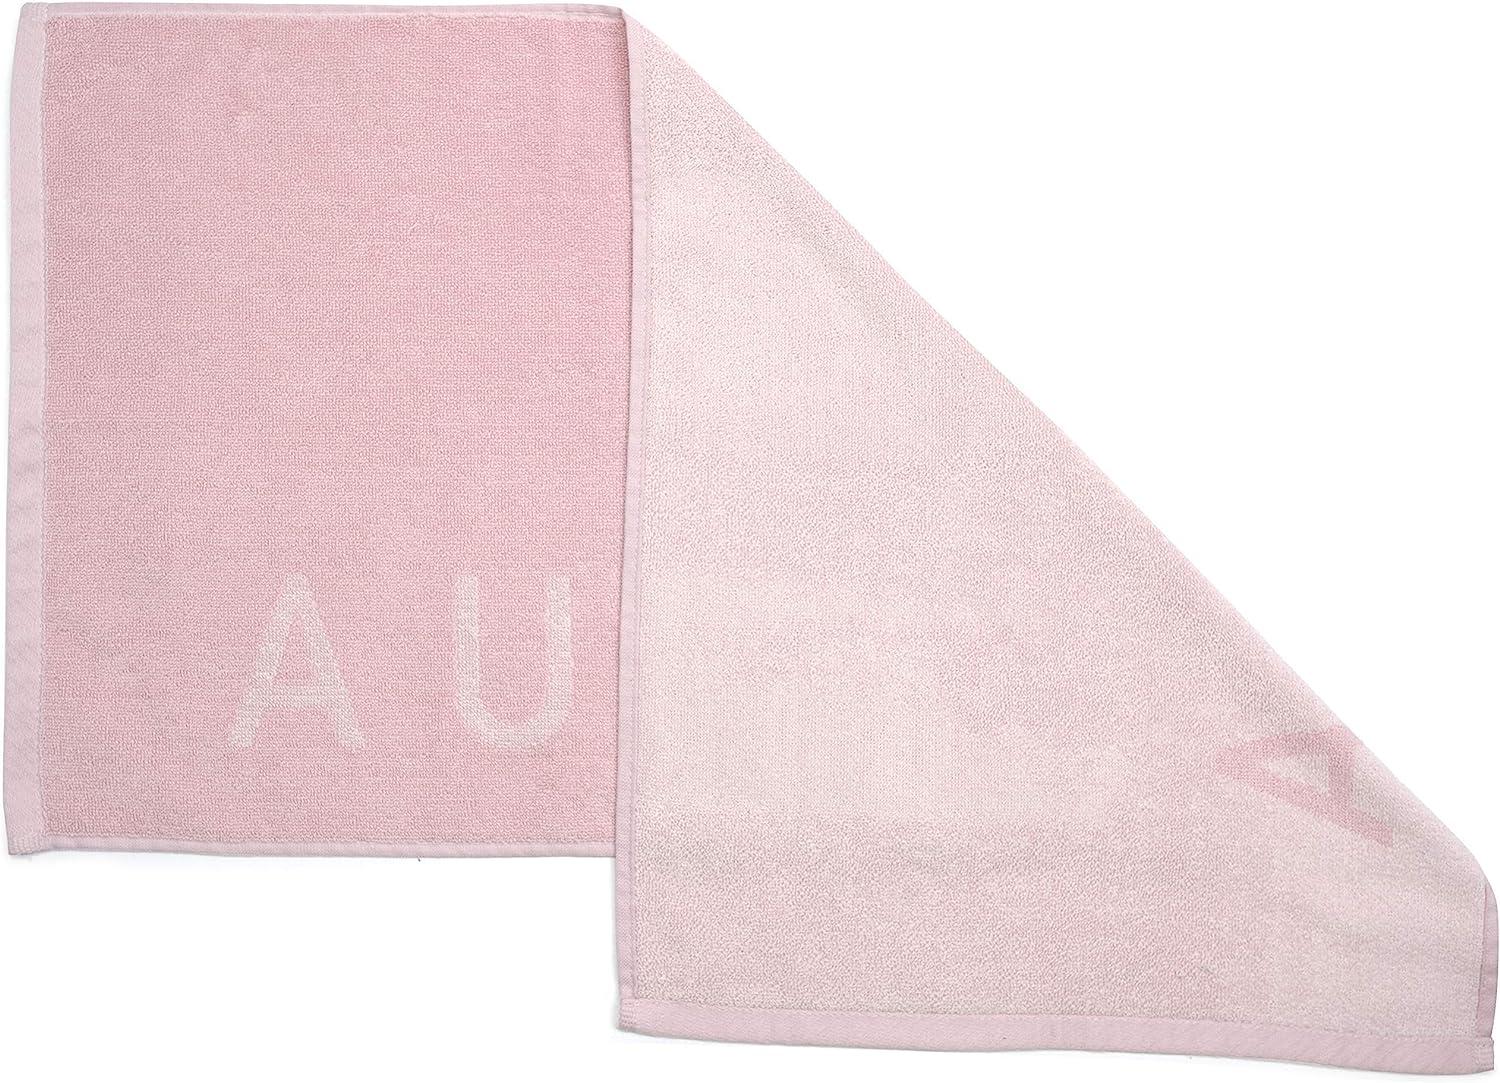 Luxury Gym Towel for Sweat - 100% Organic Cotton - Soft and